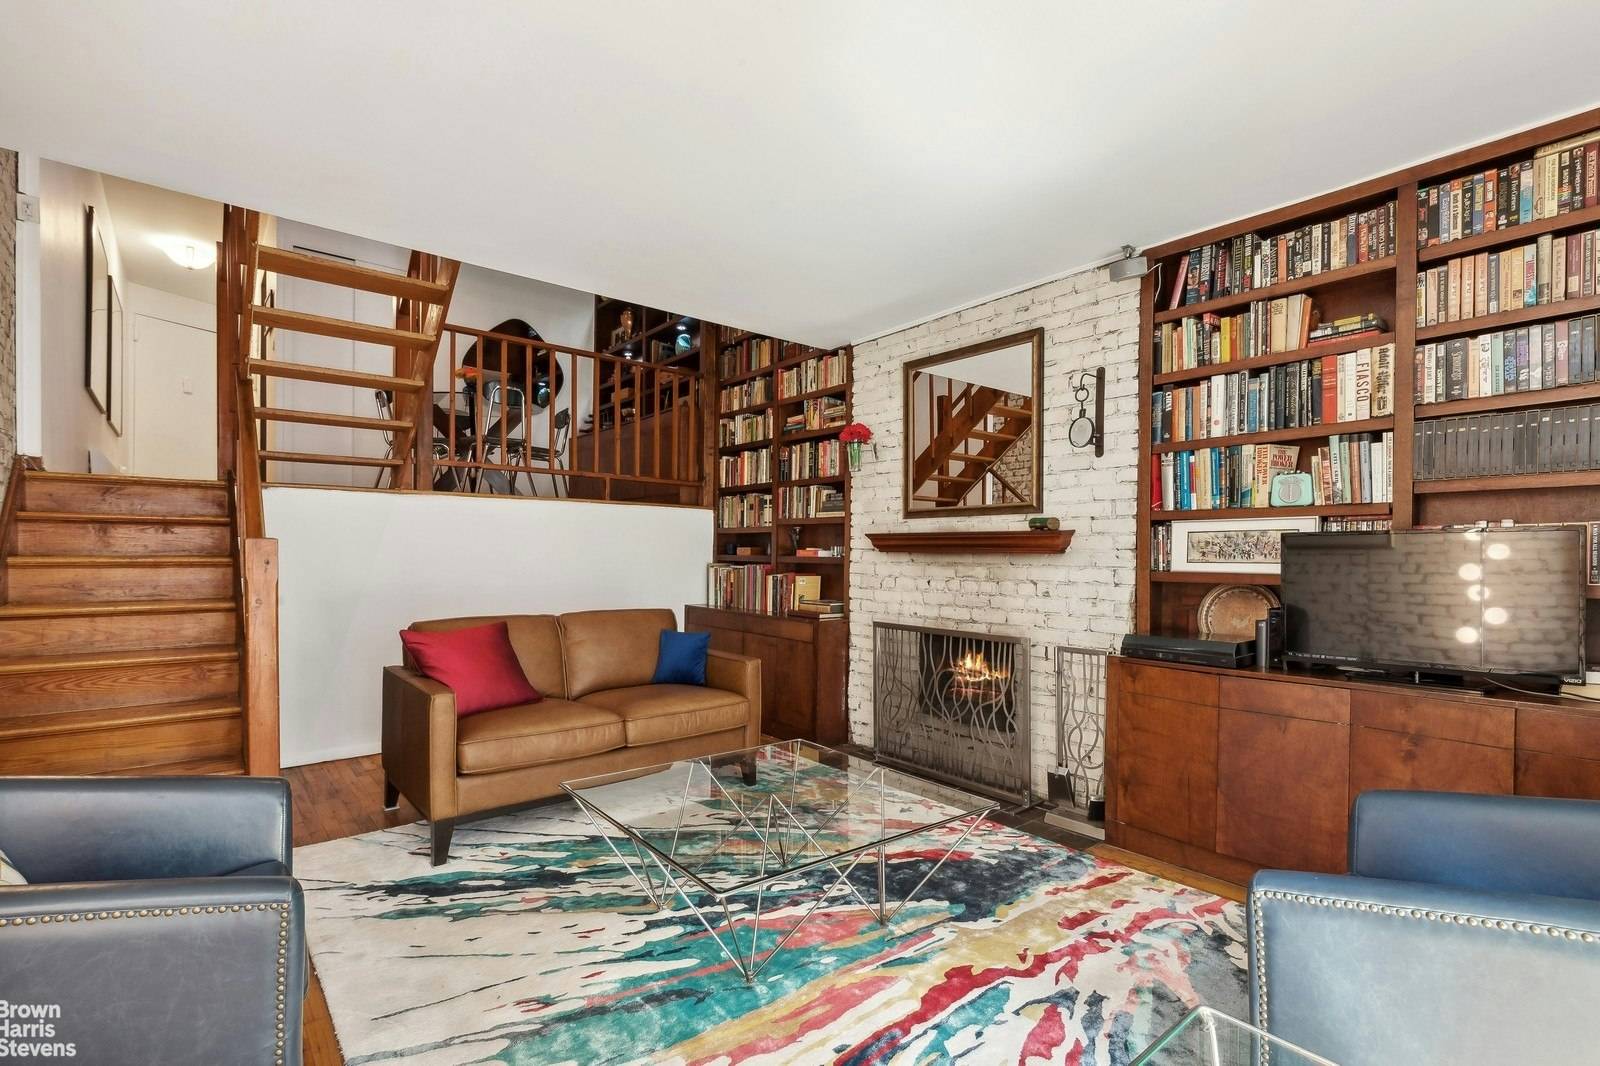 Picture this, coming home to Apartment 5A at 49 East 12th Street in iconic Greenwich Village, a unique triplex layout with a wood burning fireplace, a south facing balcony and ...